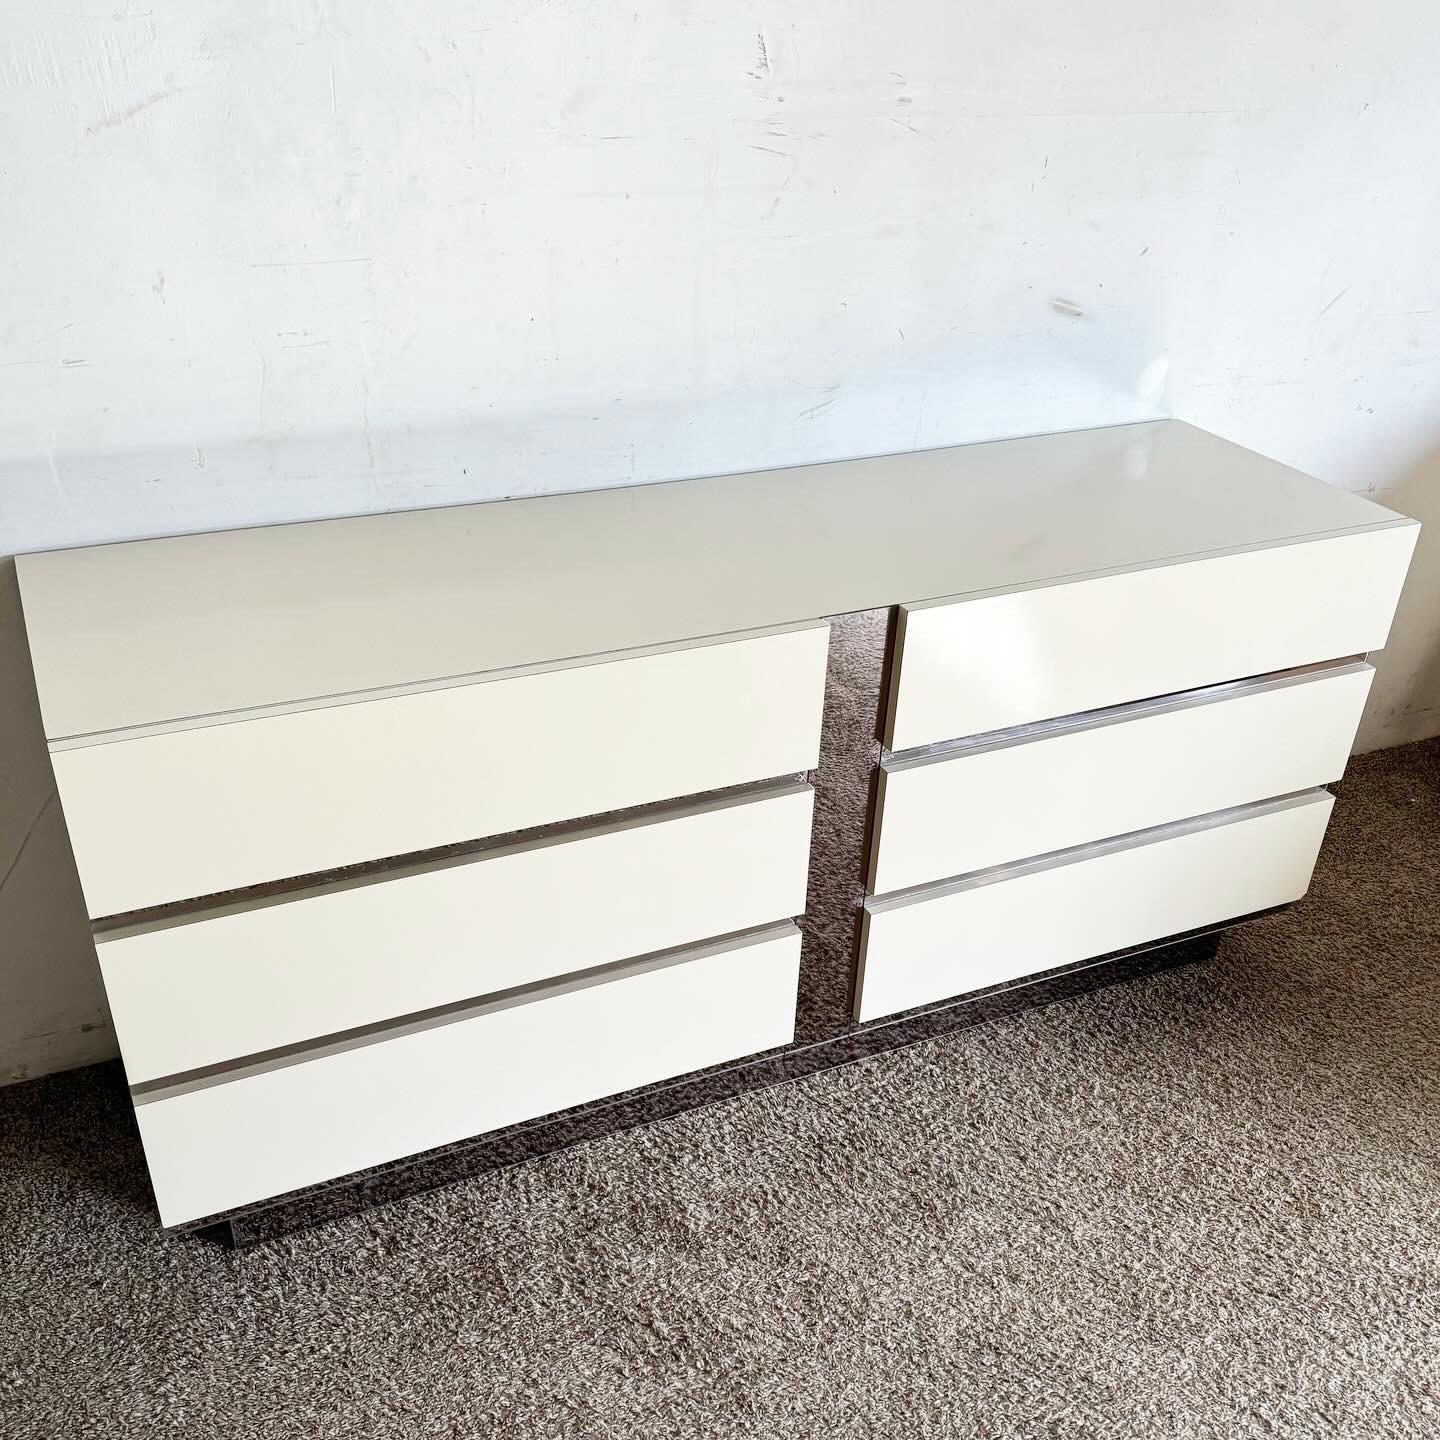 Wood Postmodern Cream Lacquer Laminate and Glass Mirror Dresser - 6 Drawers For Sale